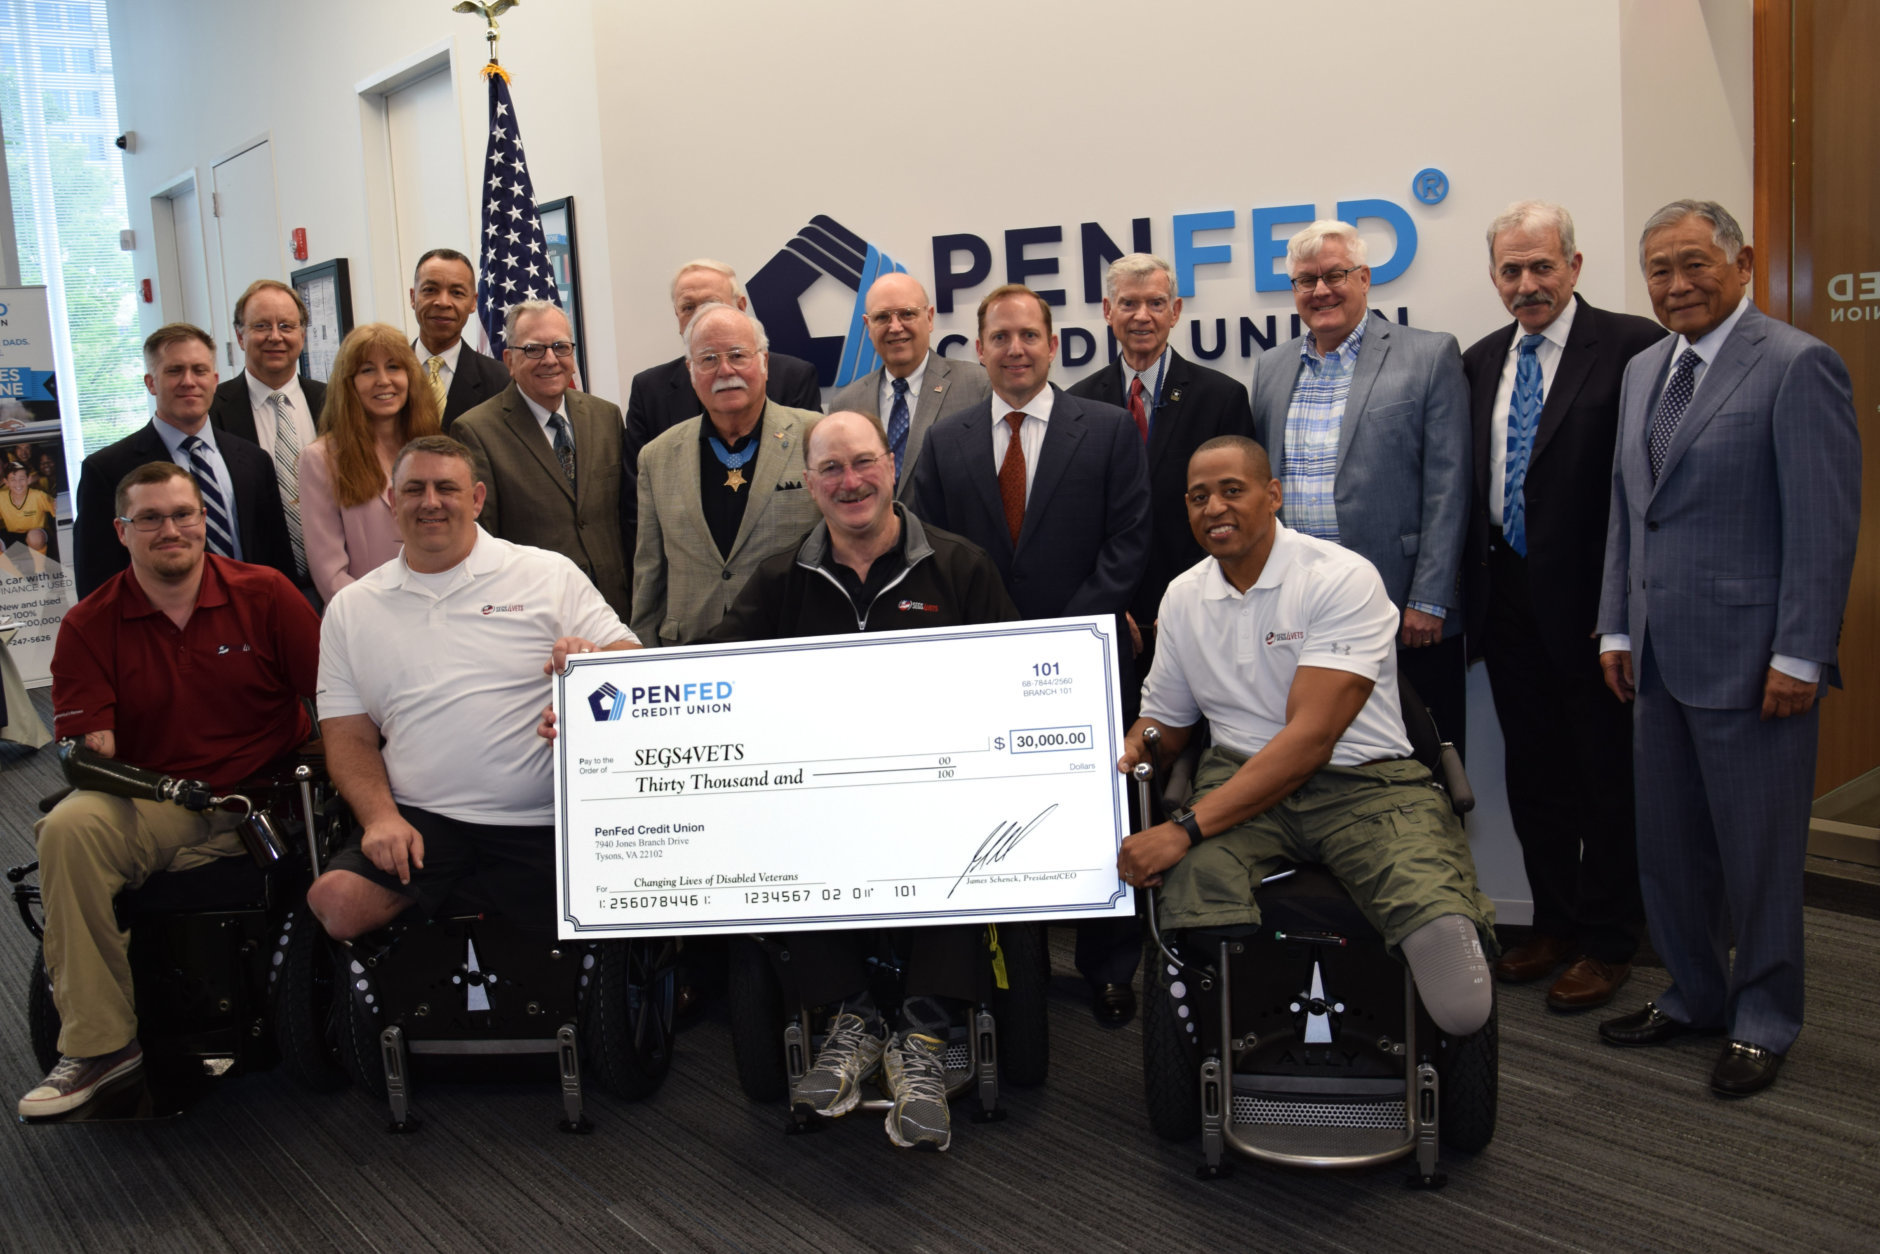 Retired Master Sgt. Cedric King, right, received his new Segway chair thanks to a $30,000 donation the PenFed Foundation made to Segs4Vets for the purchase of two Segway chairs in April 2017. (Courtesy PenFed)